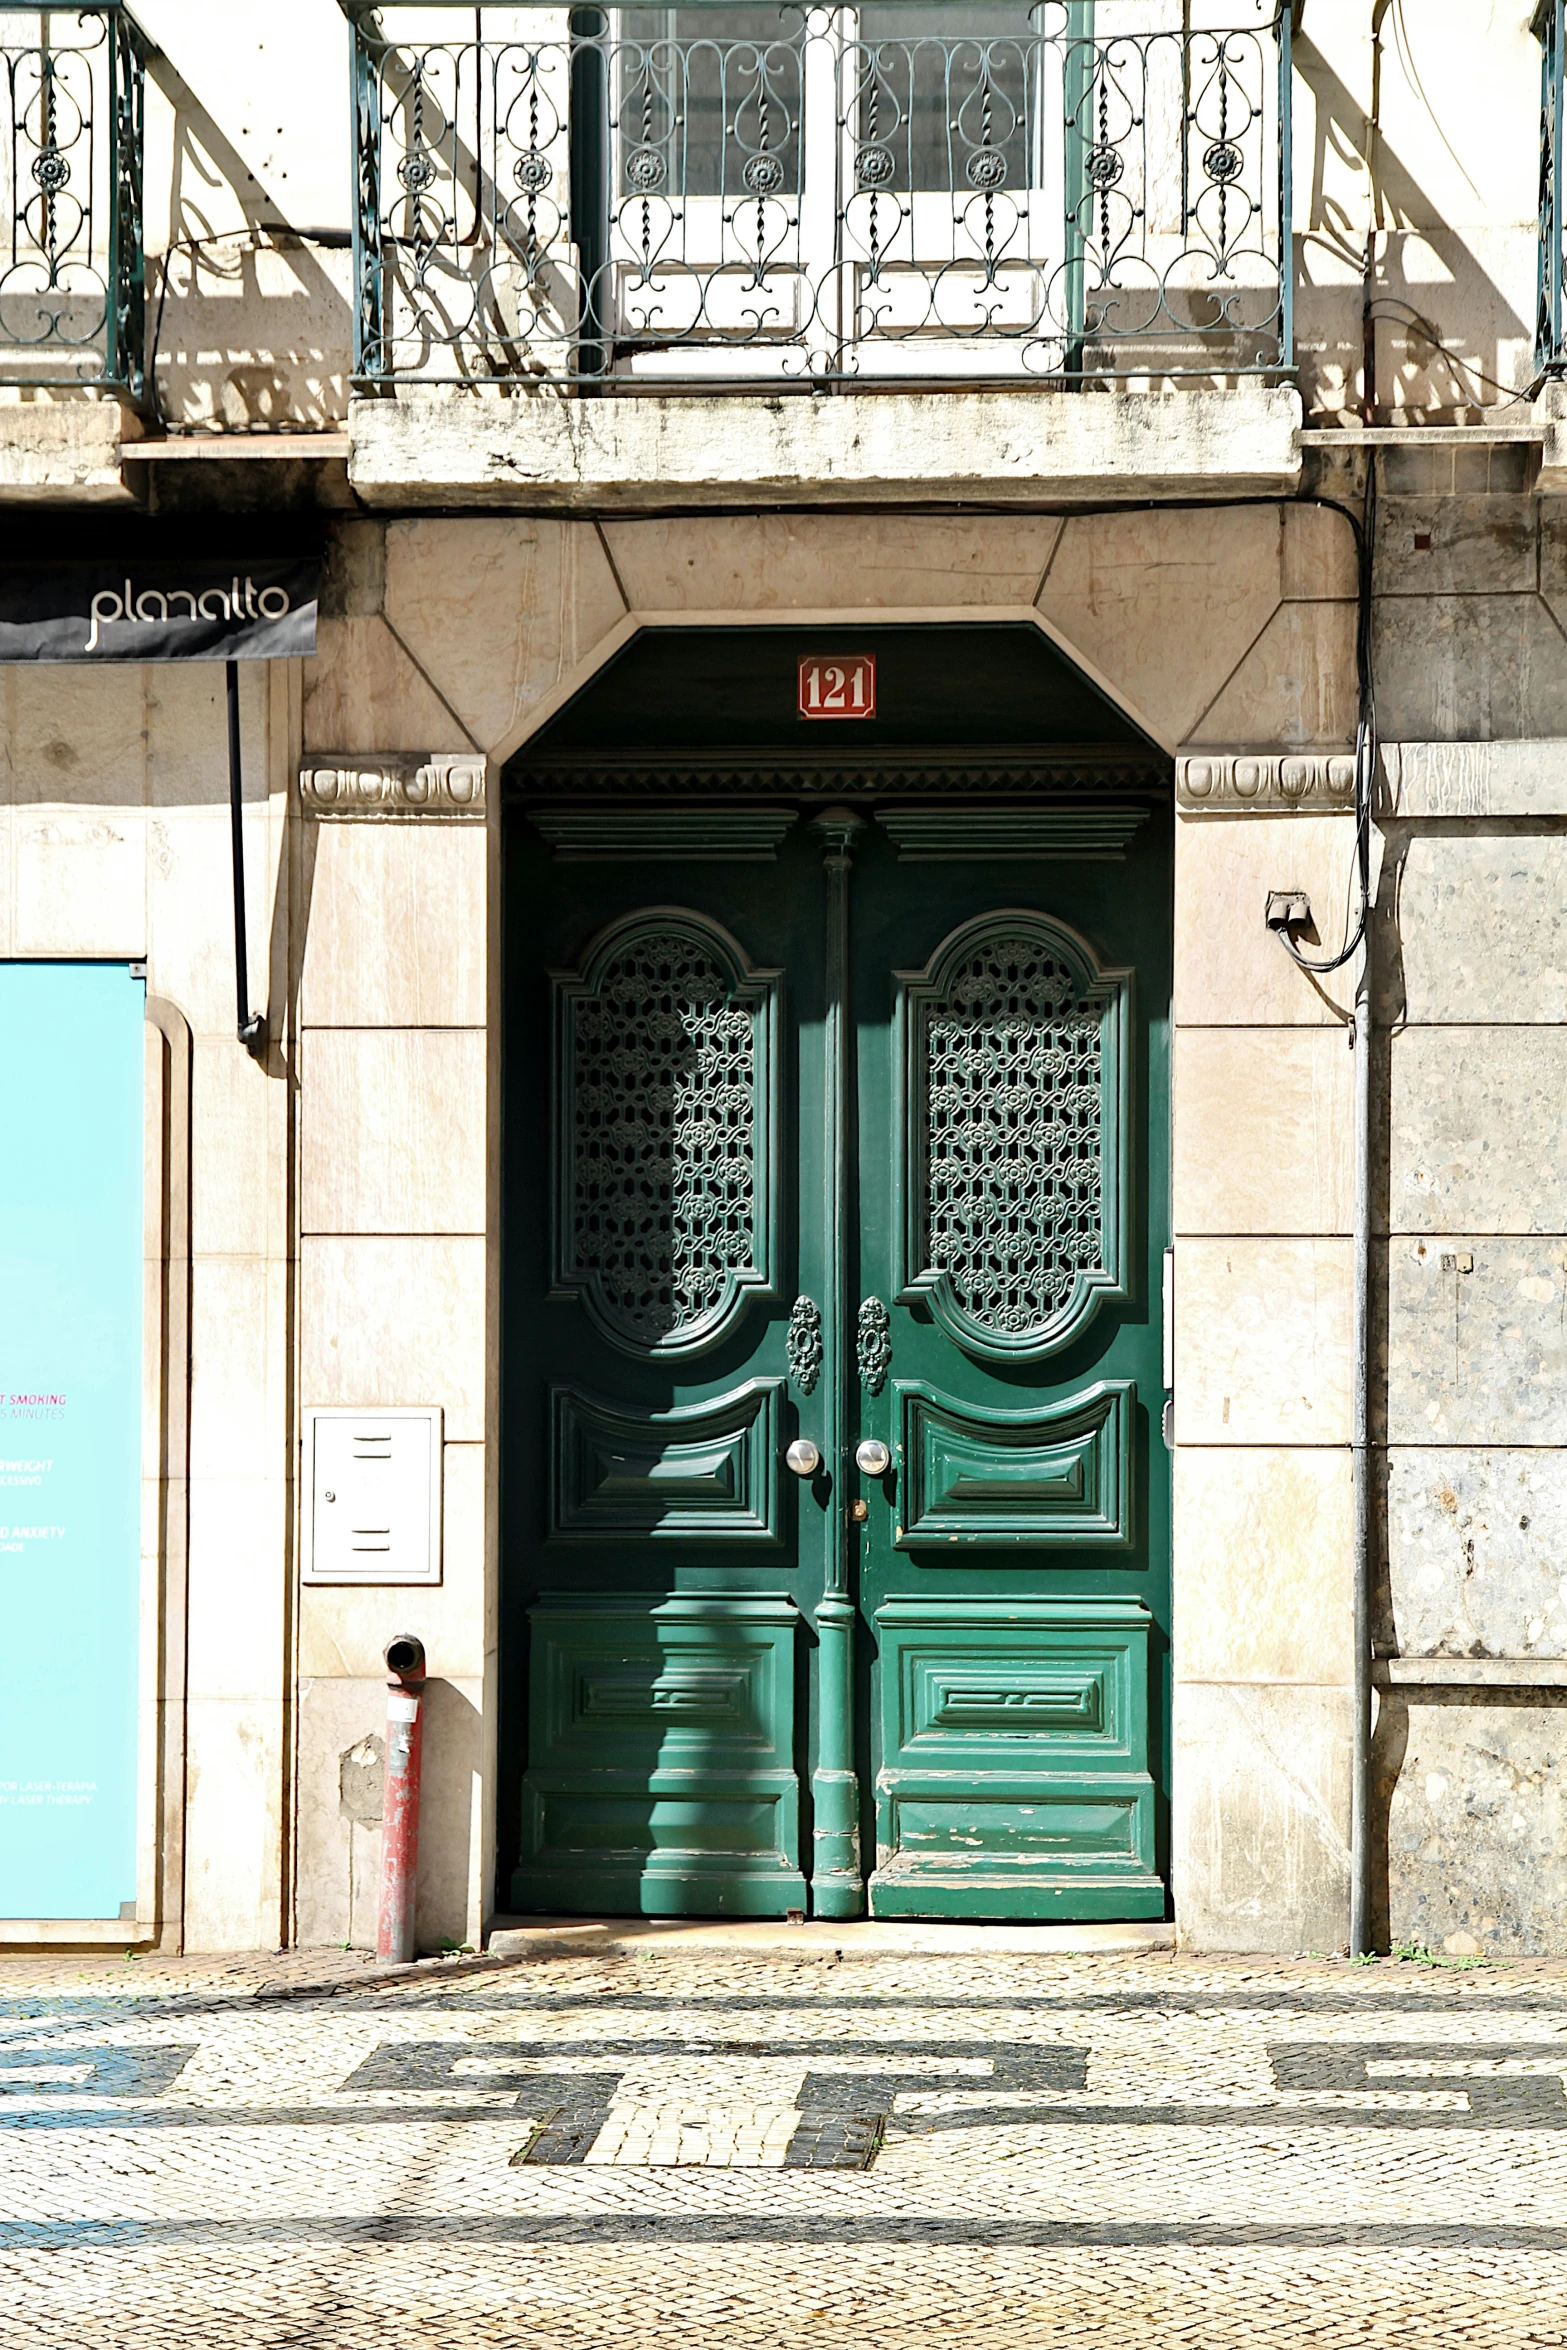 an image of a green building with double doors